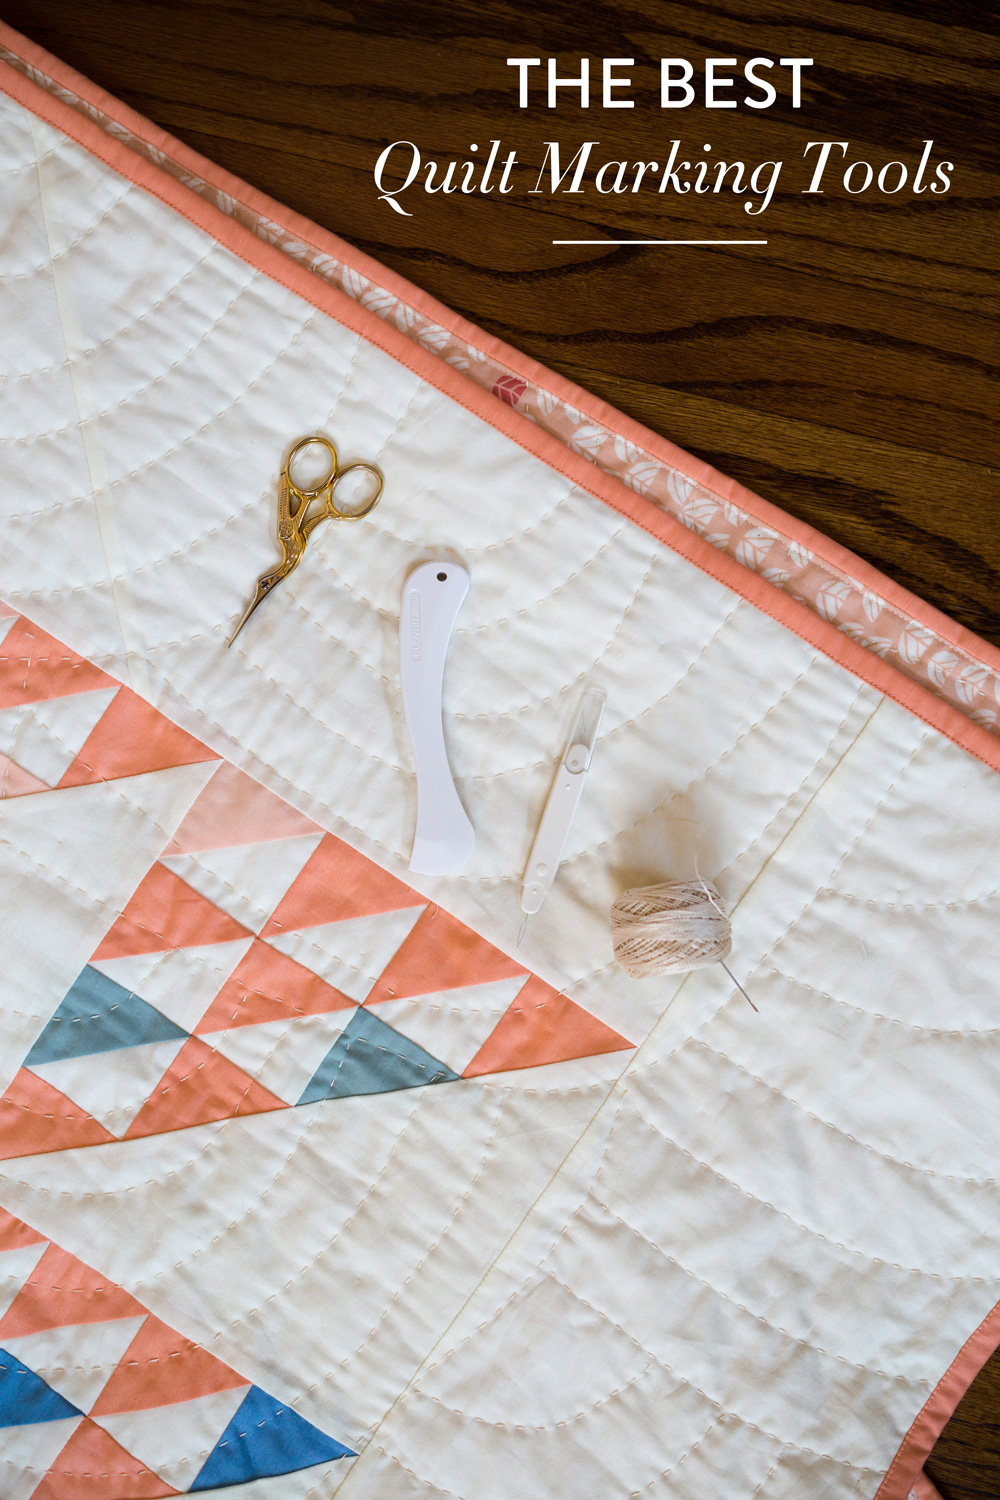 Quilt Marking Tools: Different Ways to Draw Guidelines The BEST Quilt Marking Tools | Suzy Quilts https://suzyquilts.com/quilt-marking-tools